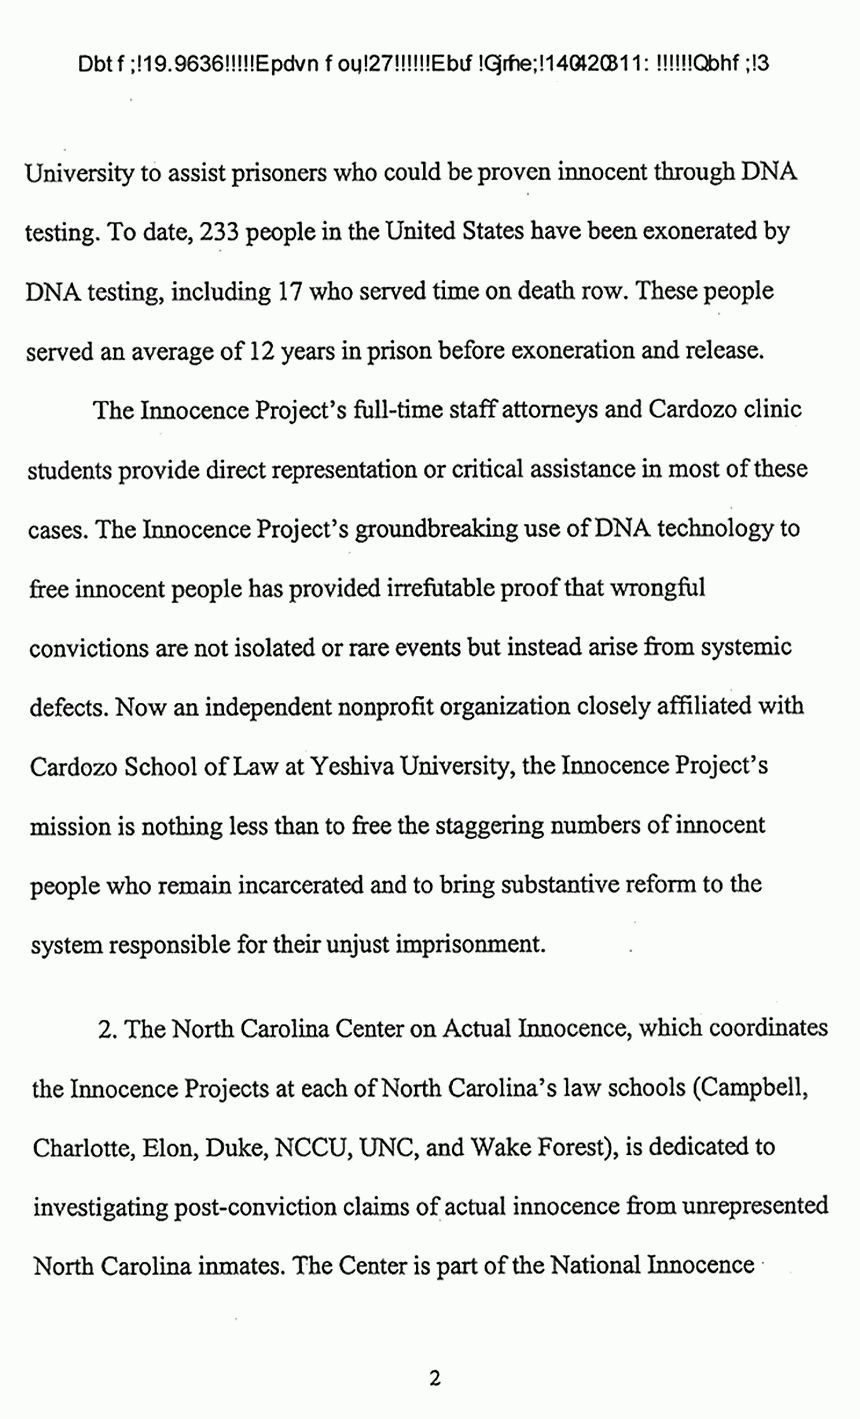 March 31, 2009: U. S. Court of Appeals for the Fourth Circuit: Motion of the Innocence Project, the North Carolina Center of Actual Innocence, and the New England Innocence Project for Leave to File Brief as Amicus Curiae, p. 2 of 5